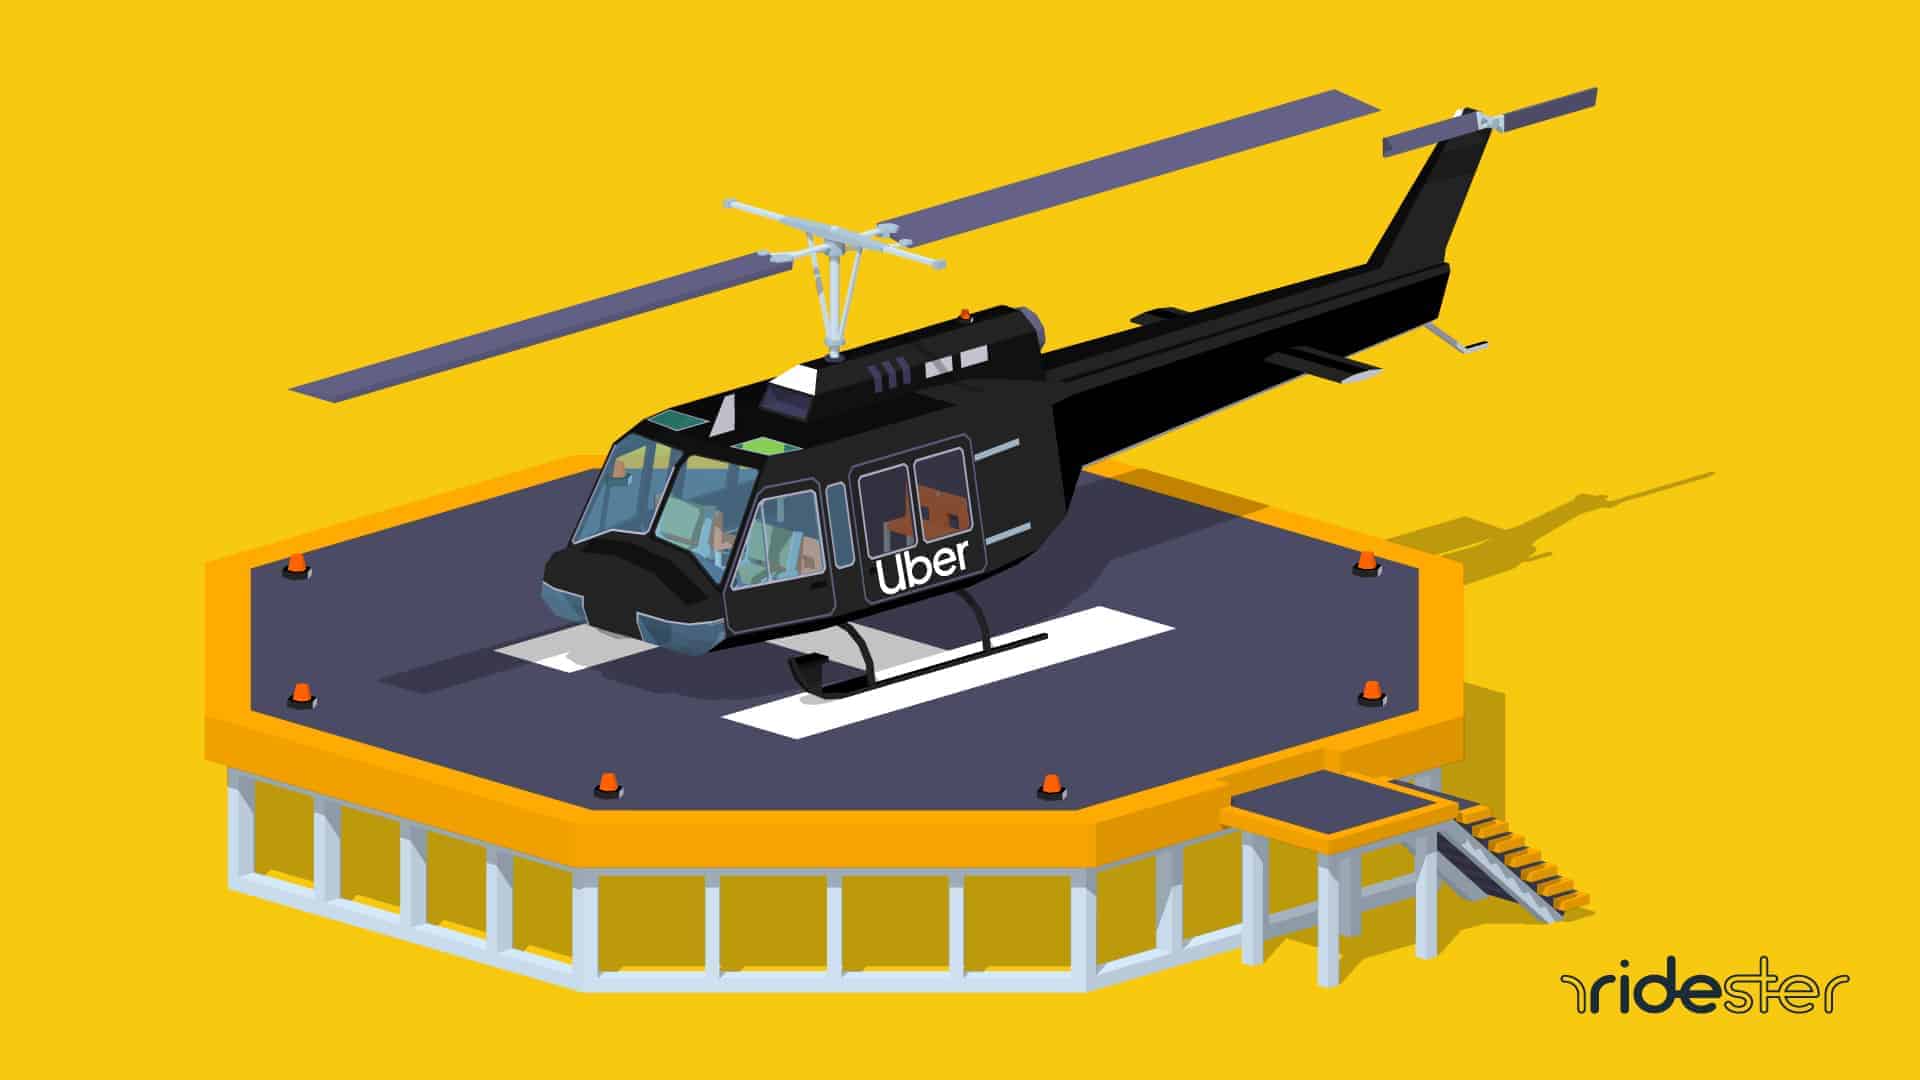 vector graphic showing an Uber helicopter on a helipad